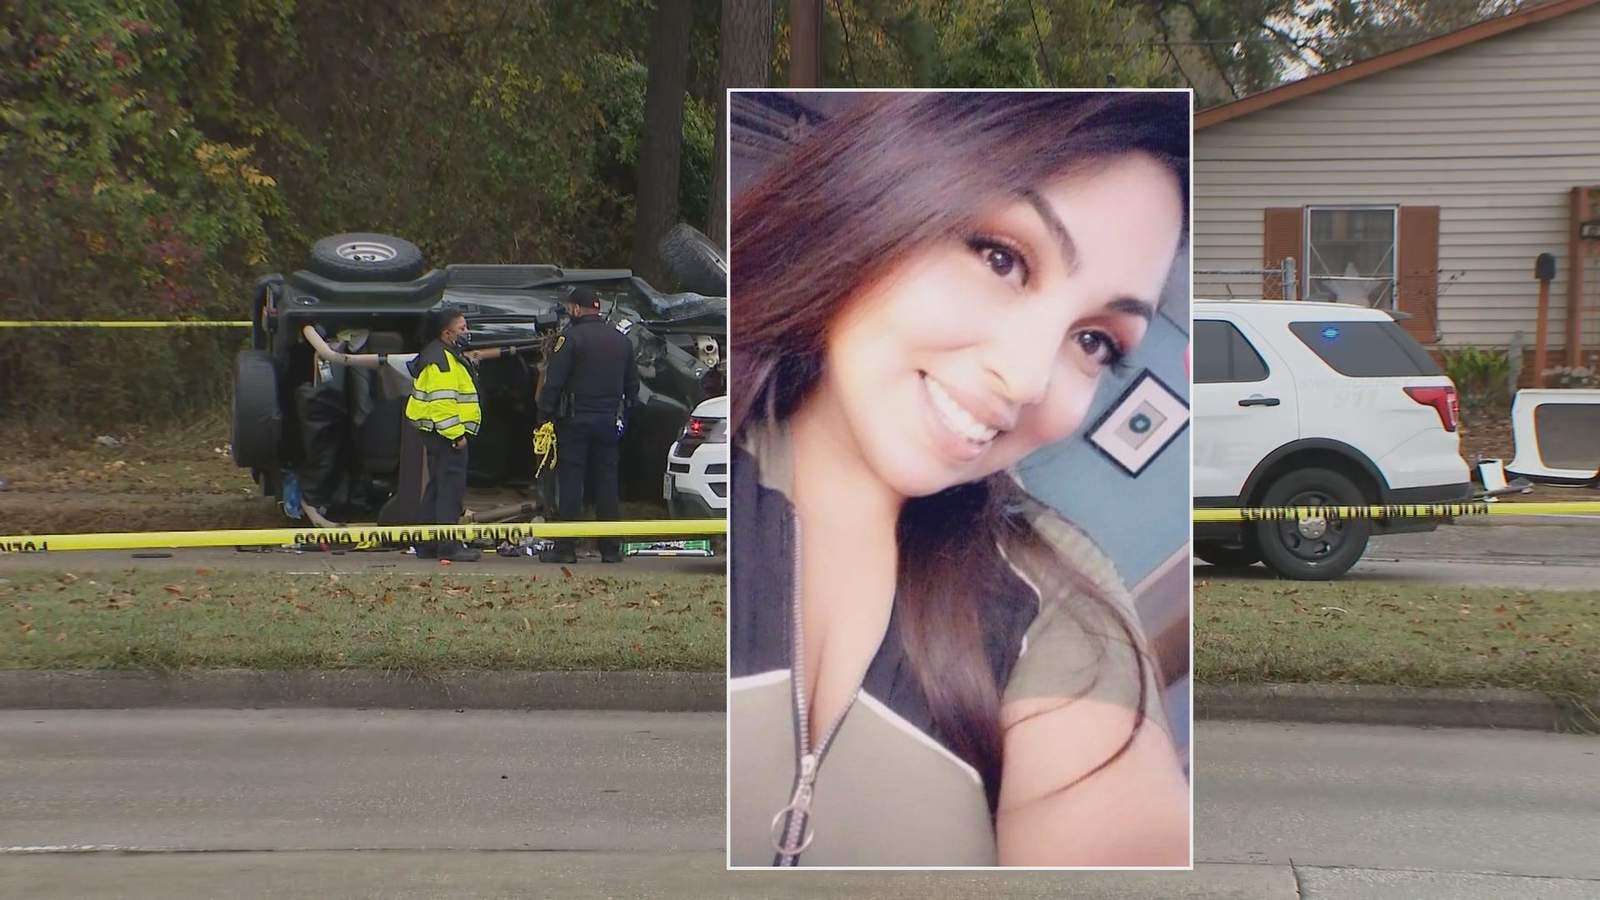 Family looking for answers after 27-year-old woman killed in hit-and-run crash in NE Houston